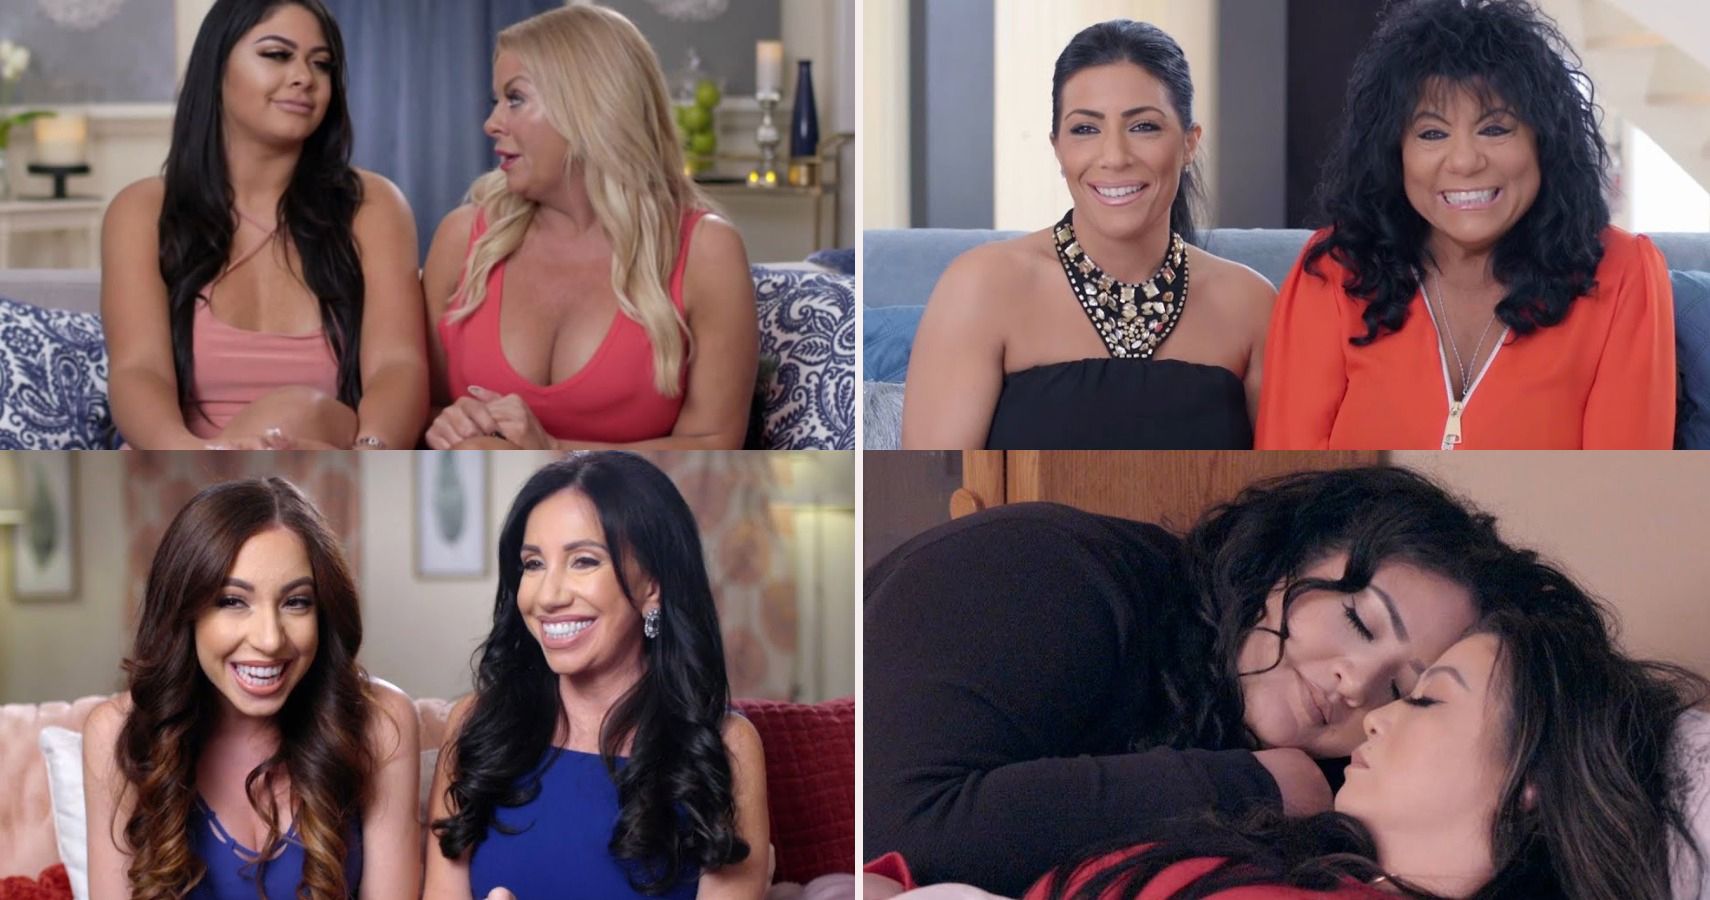 sMothered: Meet the Season 5 Cast of TLC's Hit Reality Show